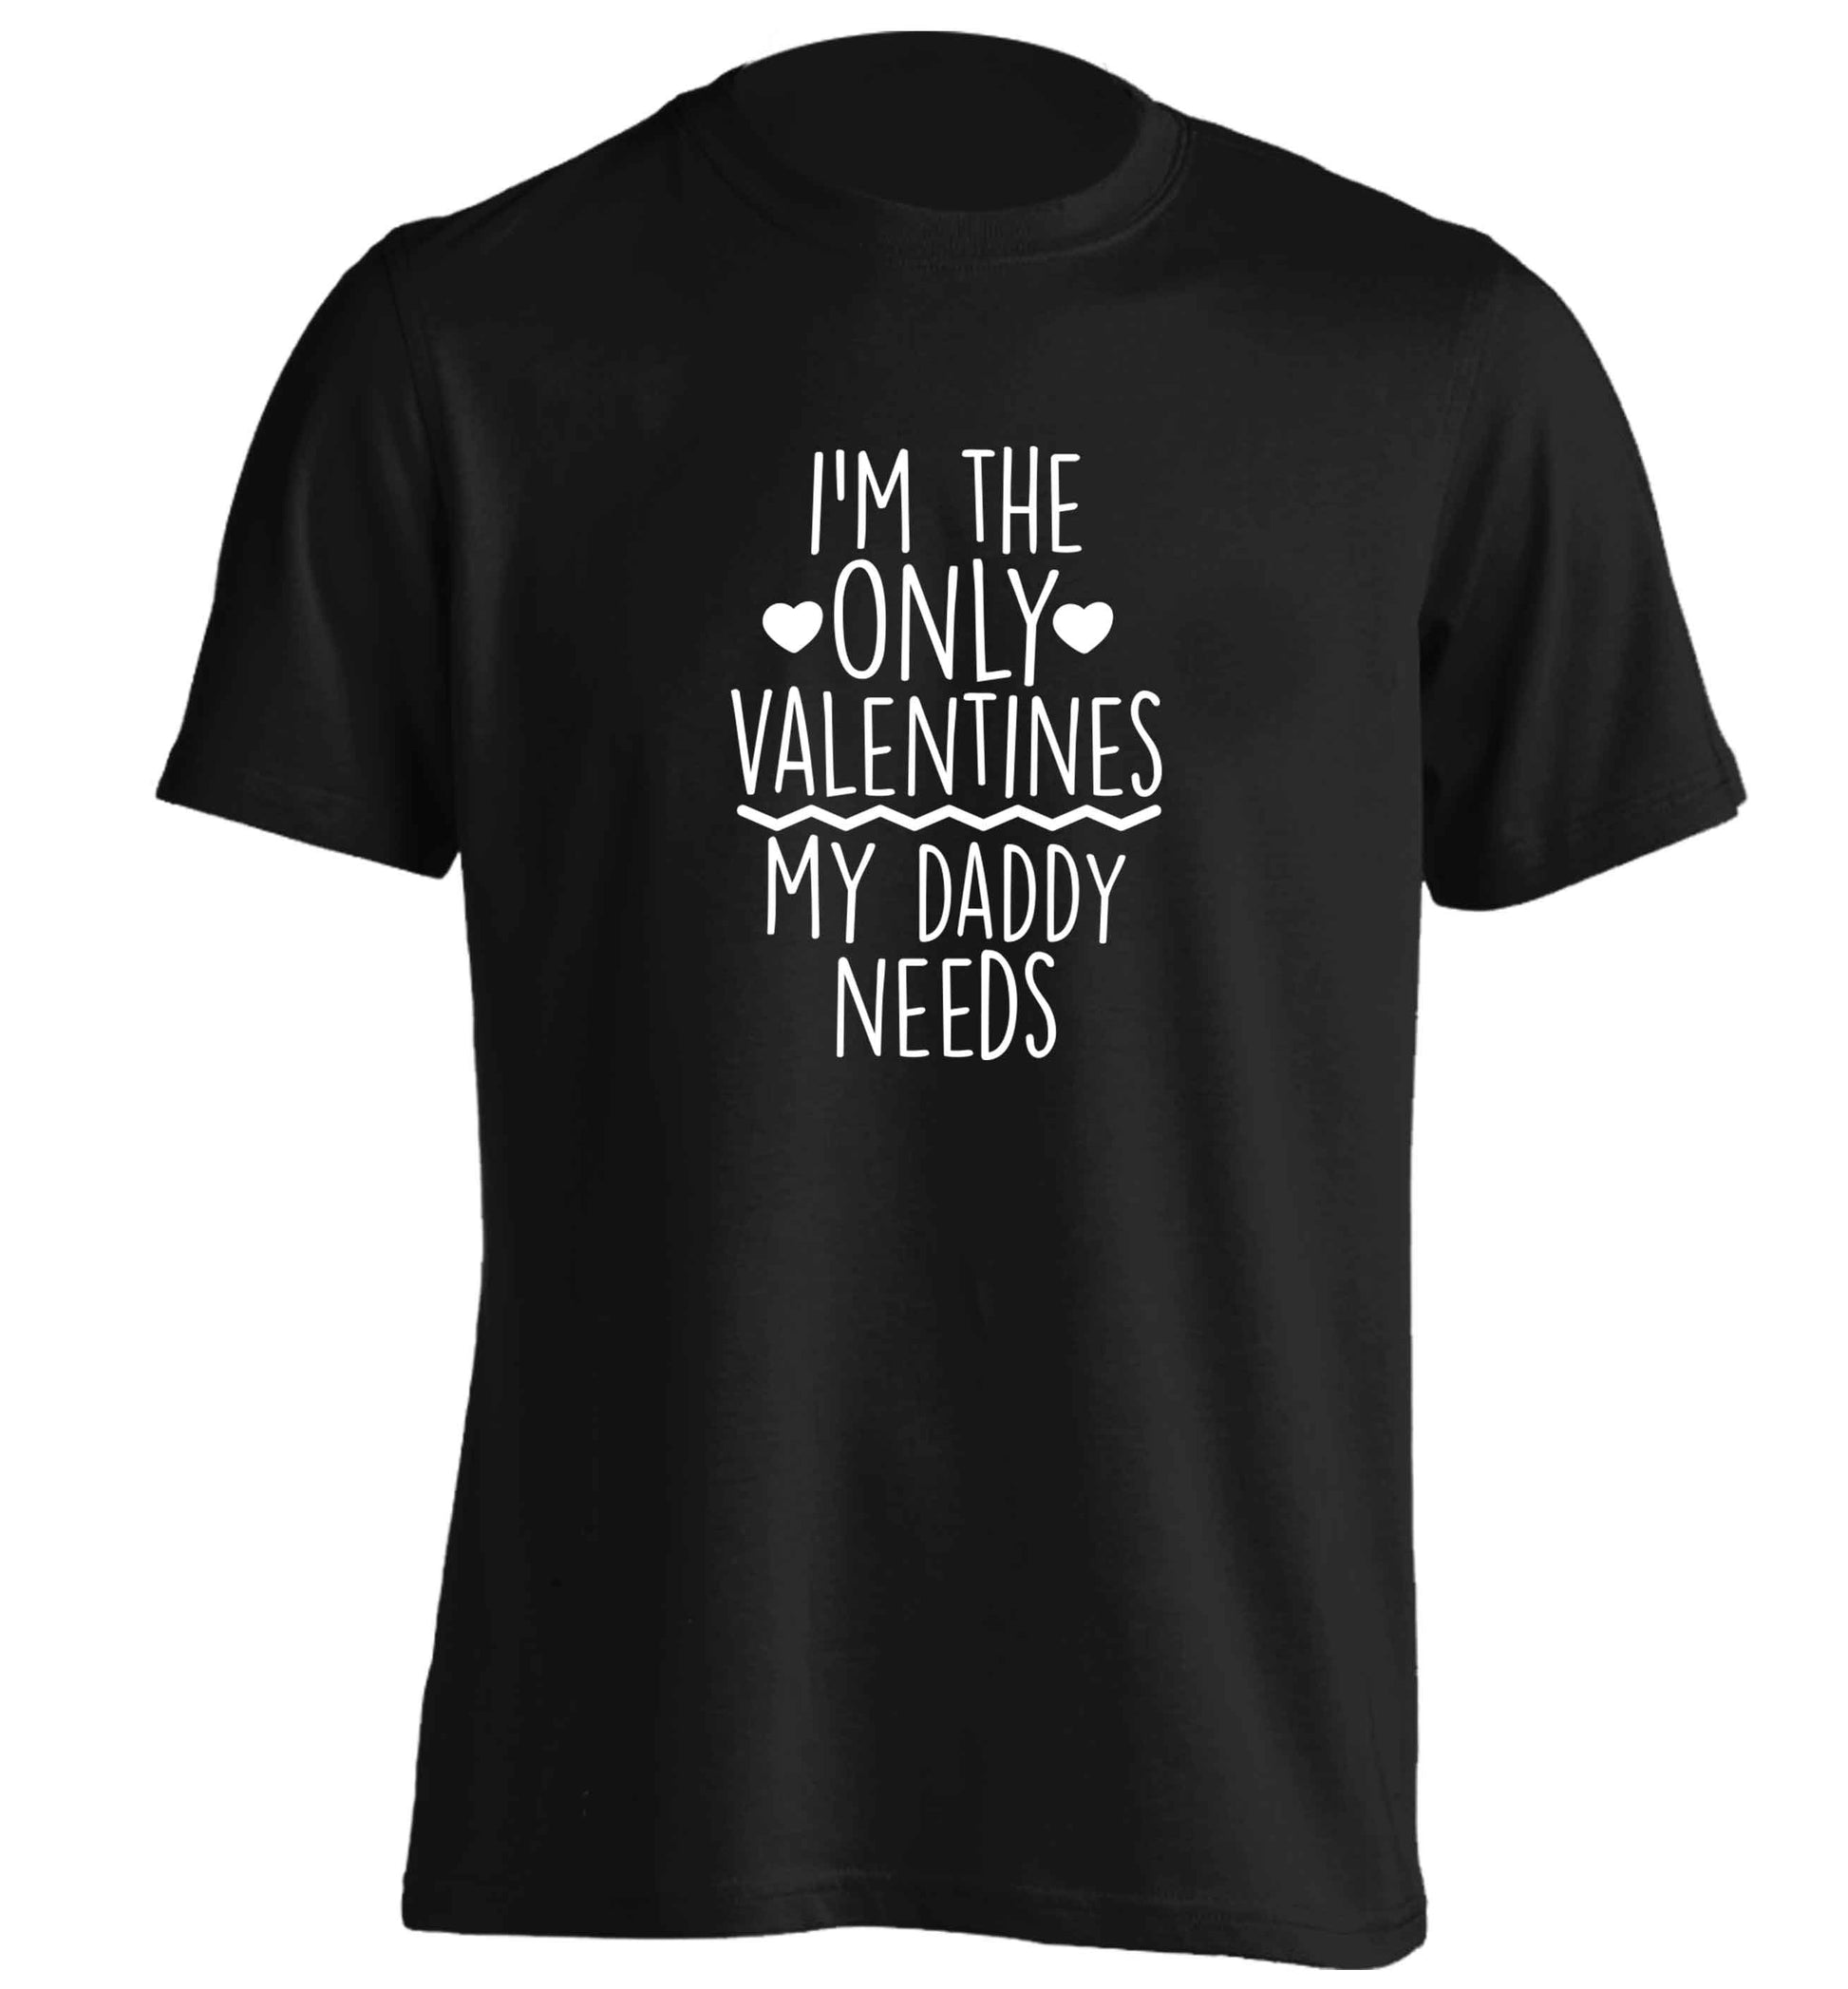 I'm the only valentines my daddy needs adults unisex black Tshirt 2XL